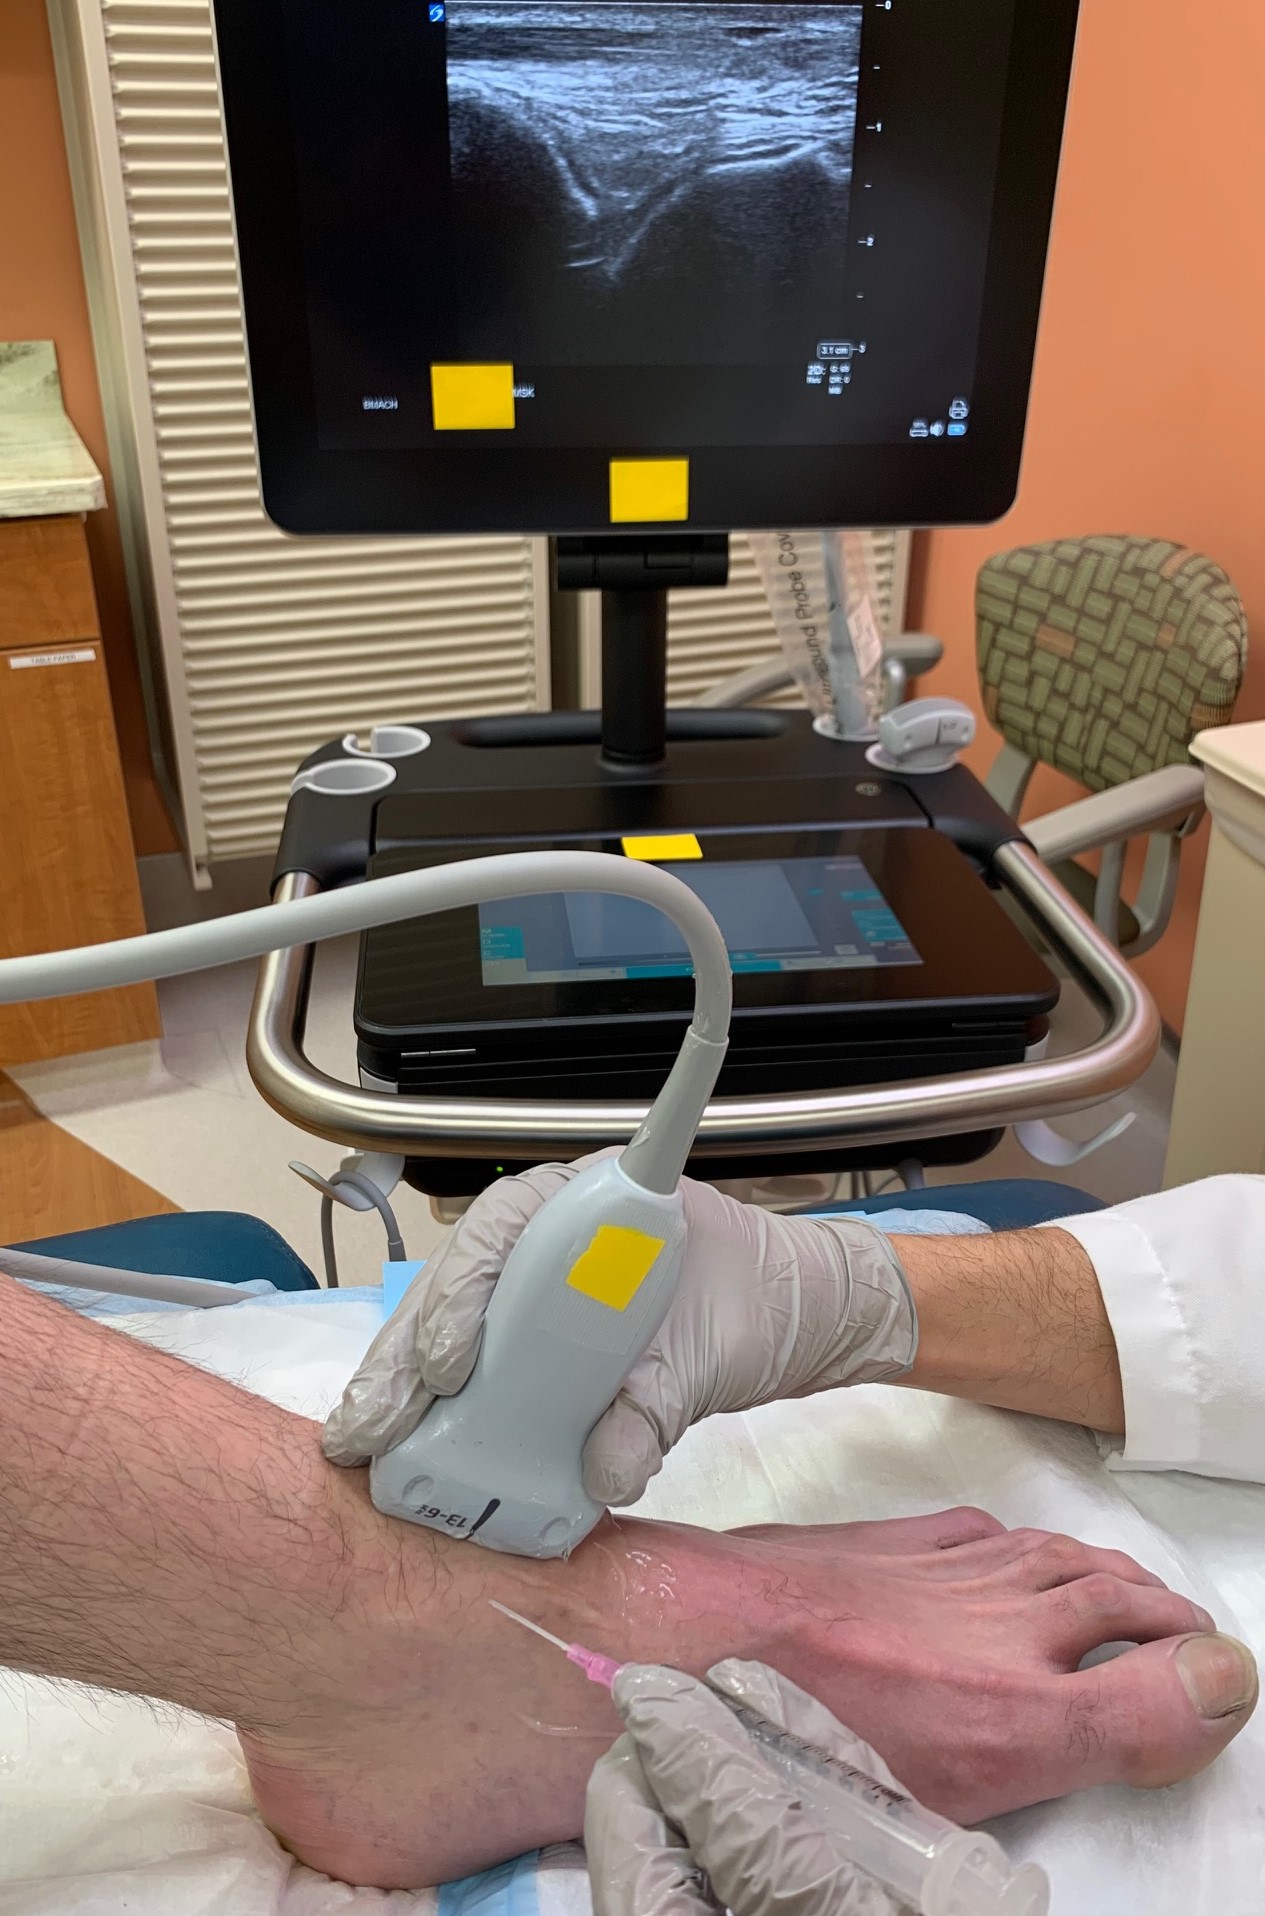 Demonstration of positioning and location for access to tibiotalar ankle joint with ultrasound guidance.  Ultrasound monitor shows desired landmarks of tibia (left) and talus (right).